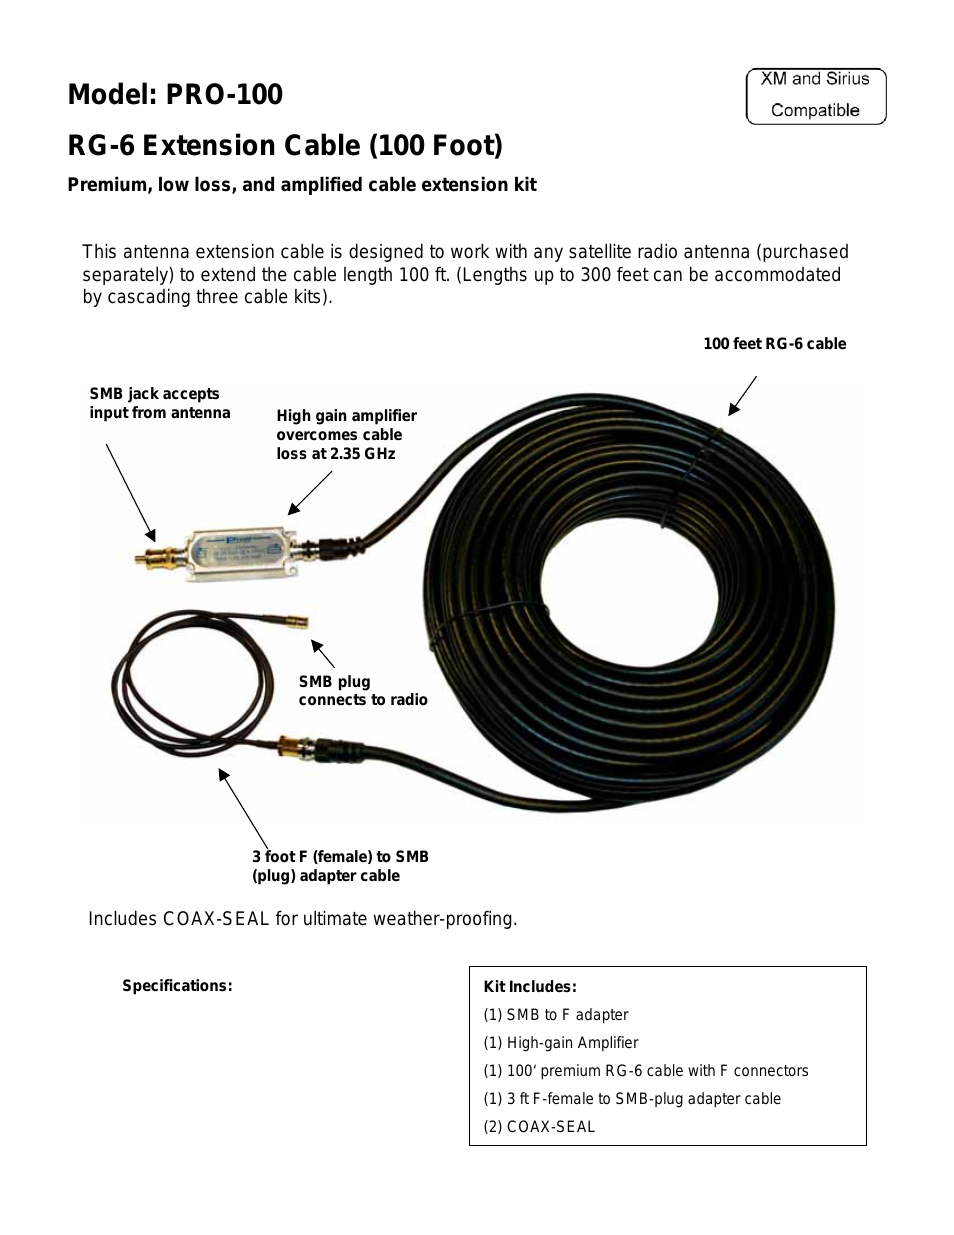 RG-6 Extension Cable PRO-100